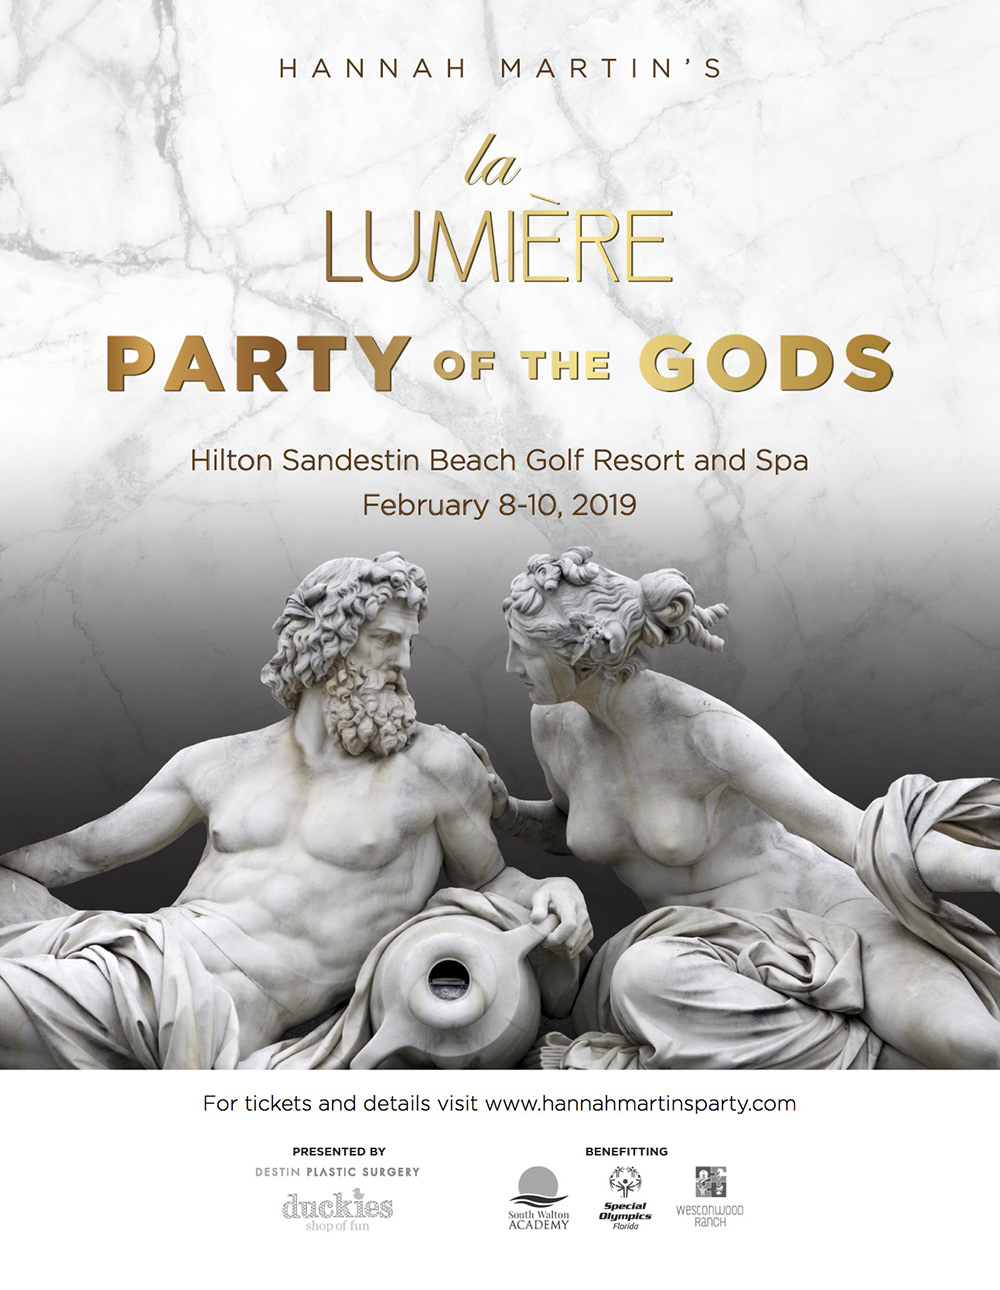 Party of the Gods Event